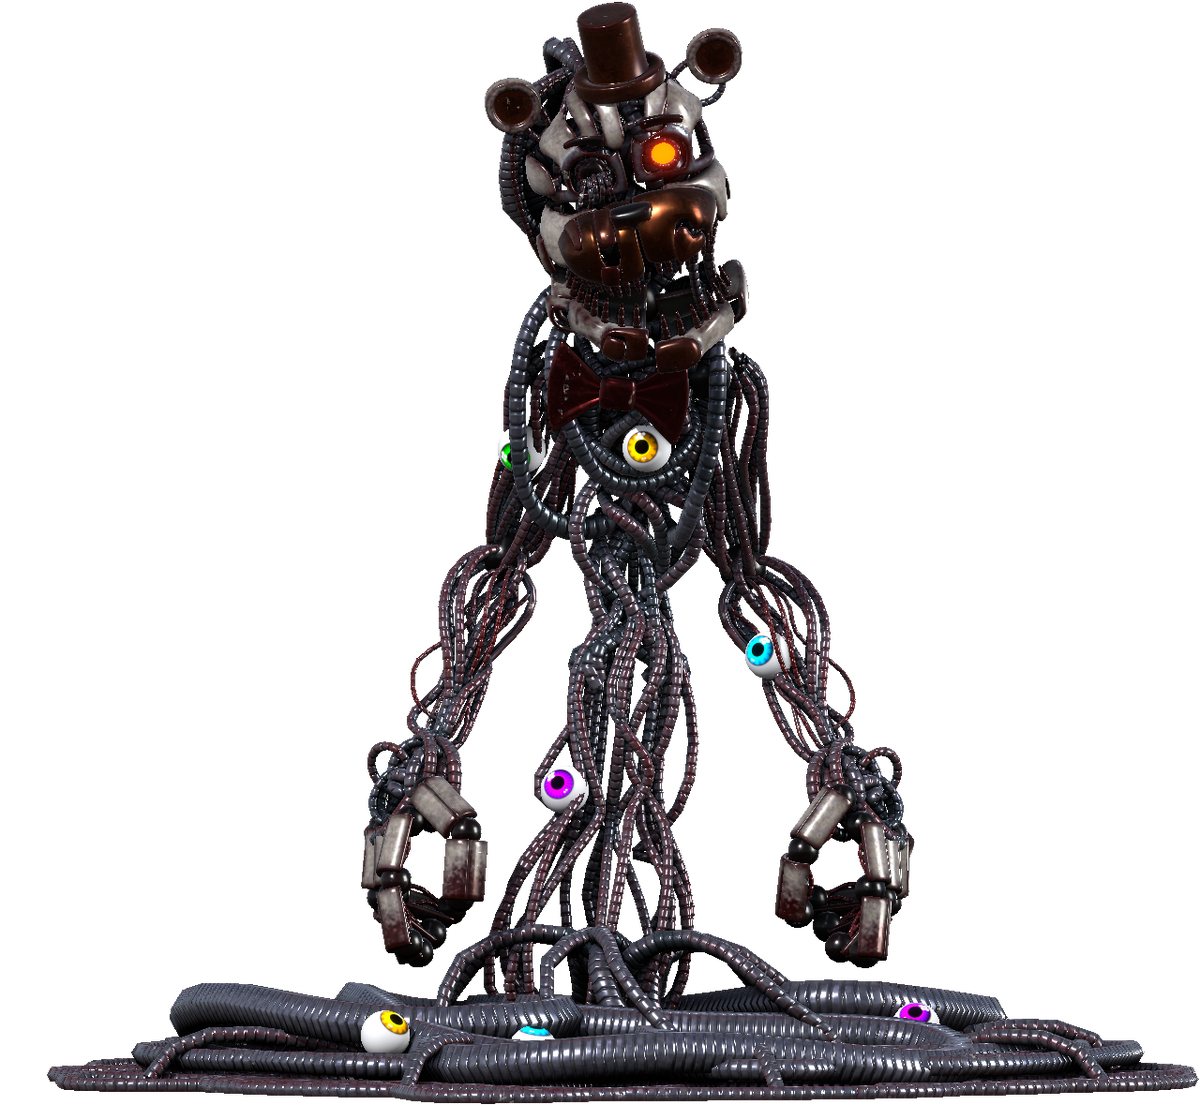 Five Nights At Freddy's AR: Special Delivery, Five Nights At Freddy's Wiki